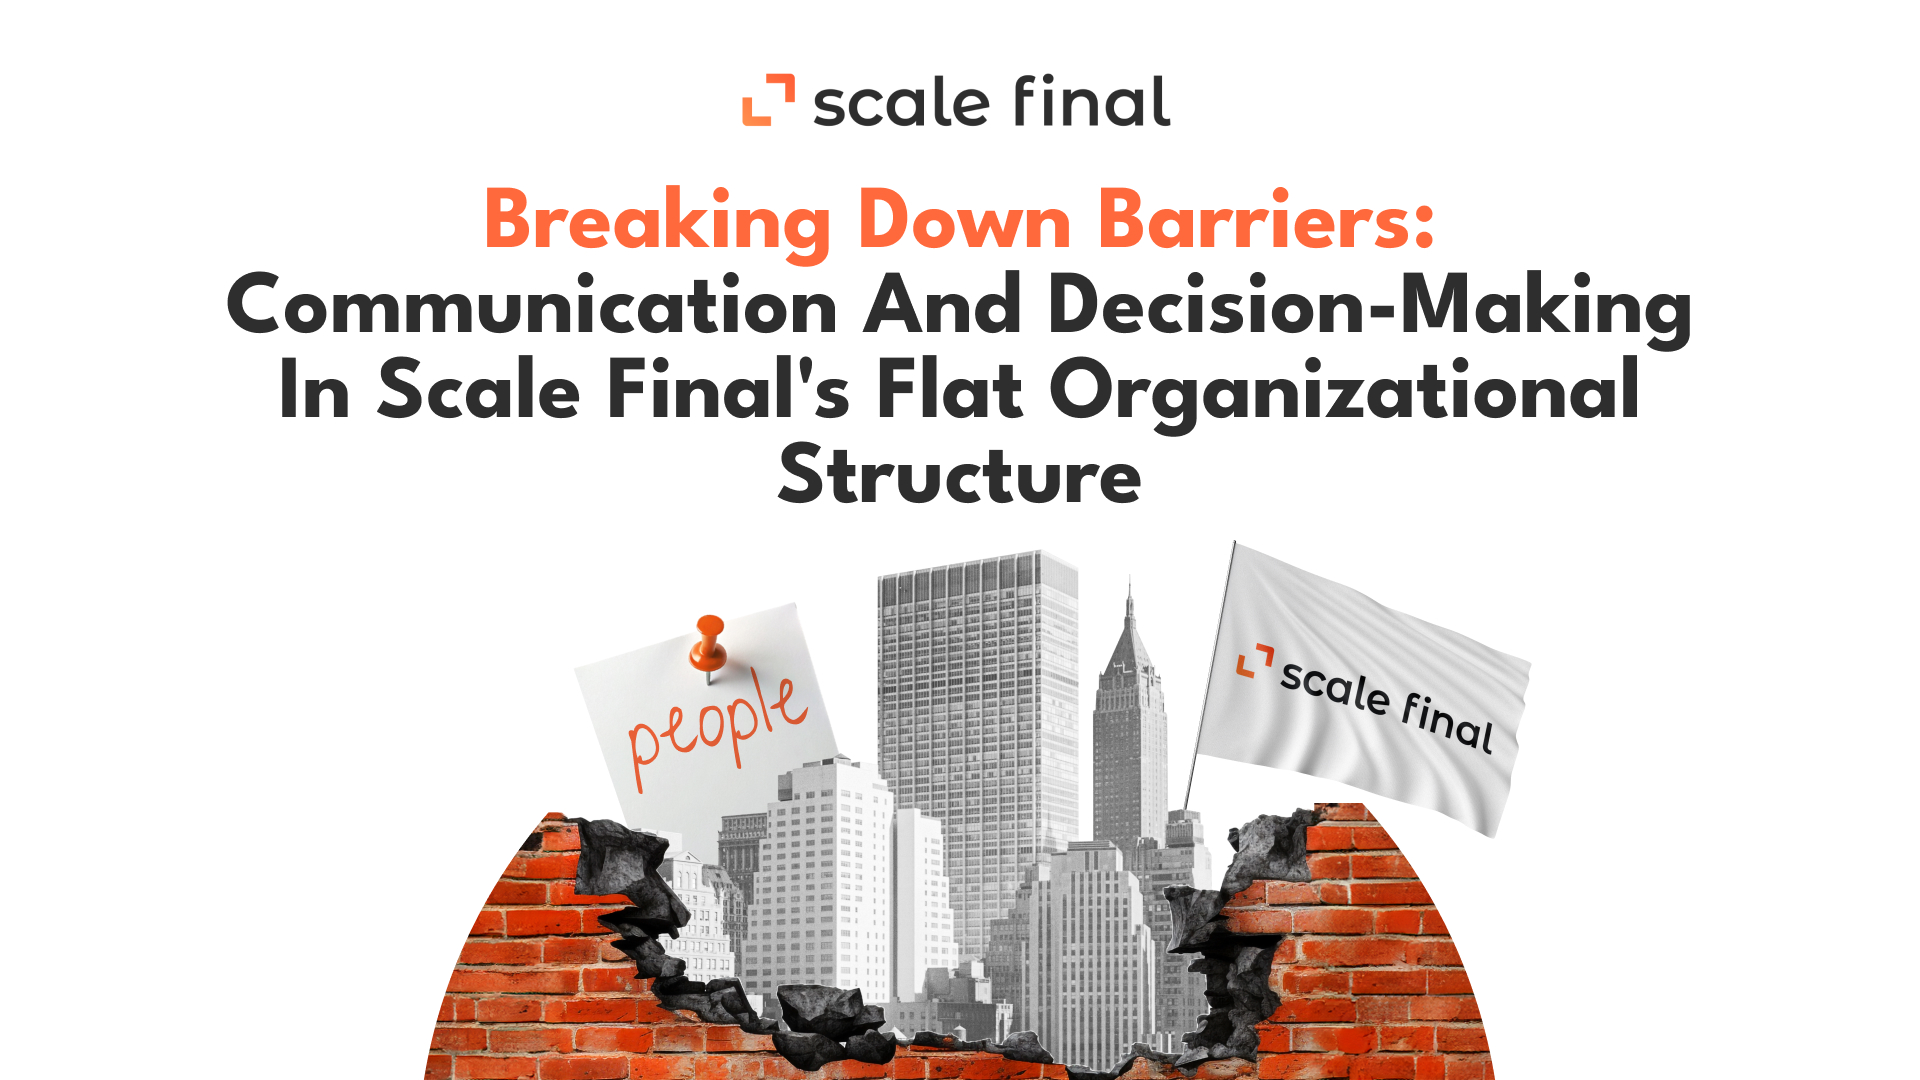 Breaking Down Barriers: Communication and Decision-Making in Scale Final's Flat Organizational Structure